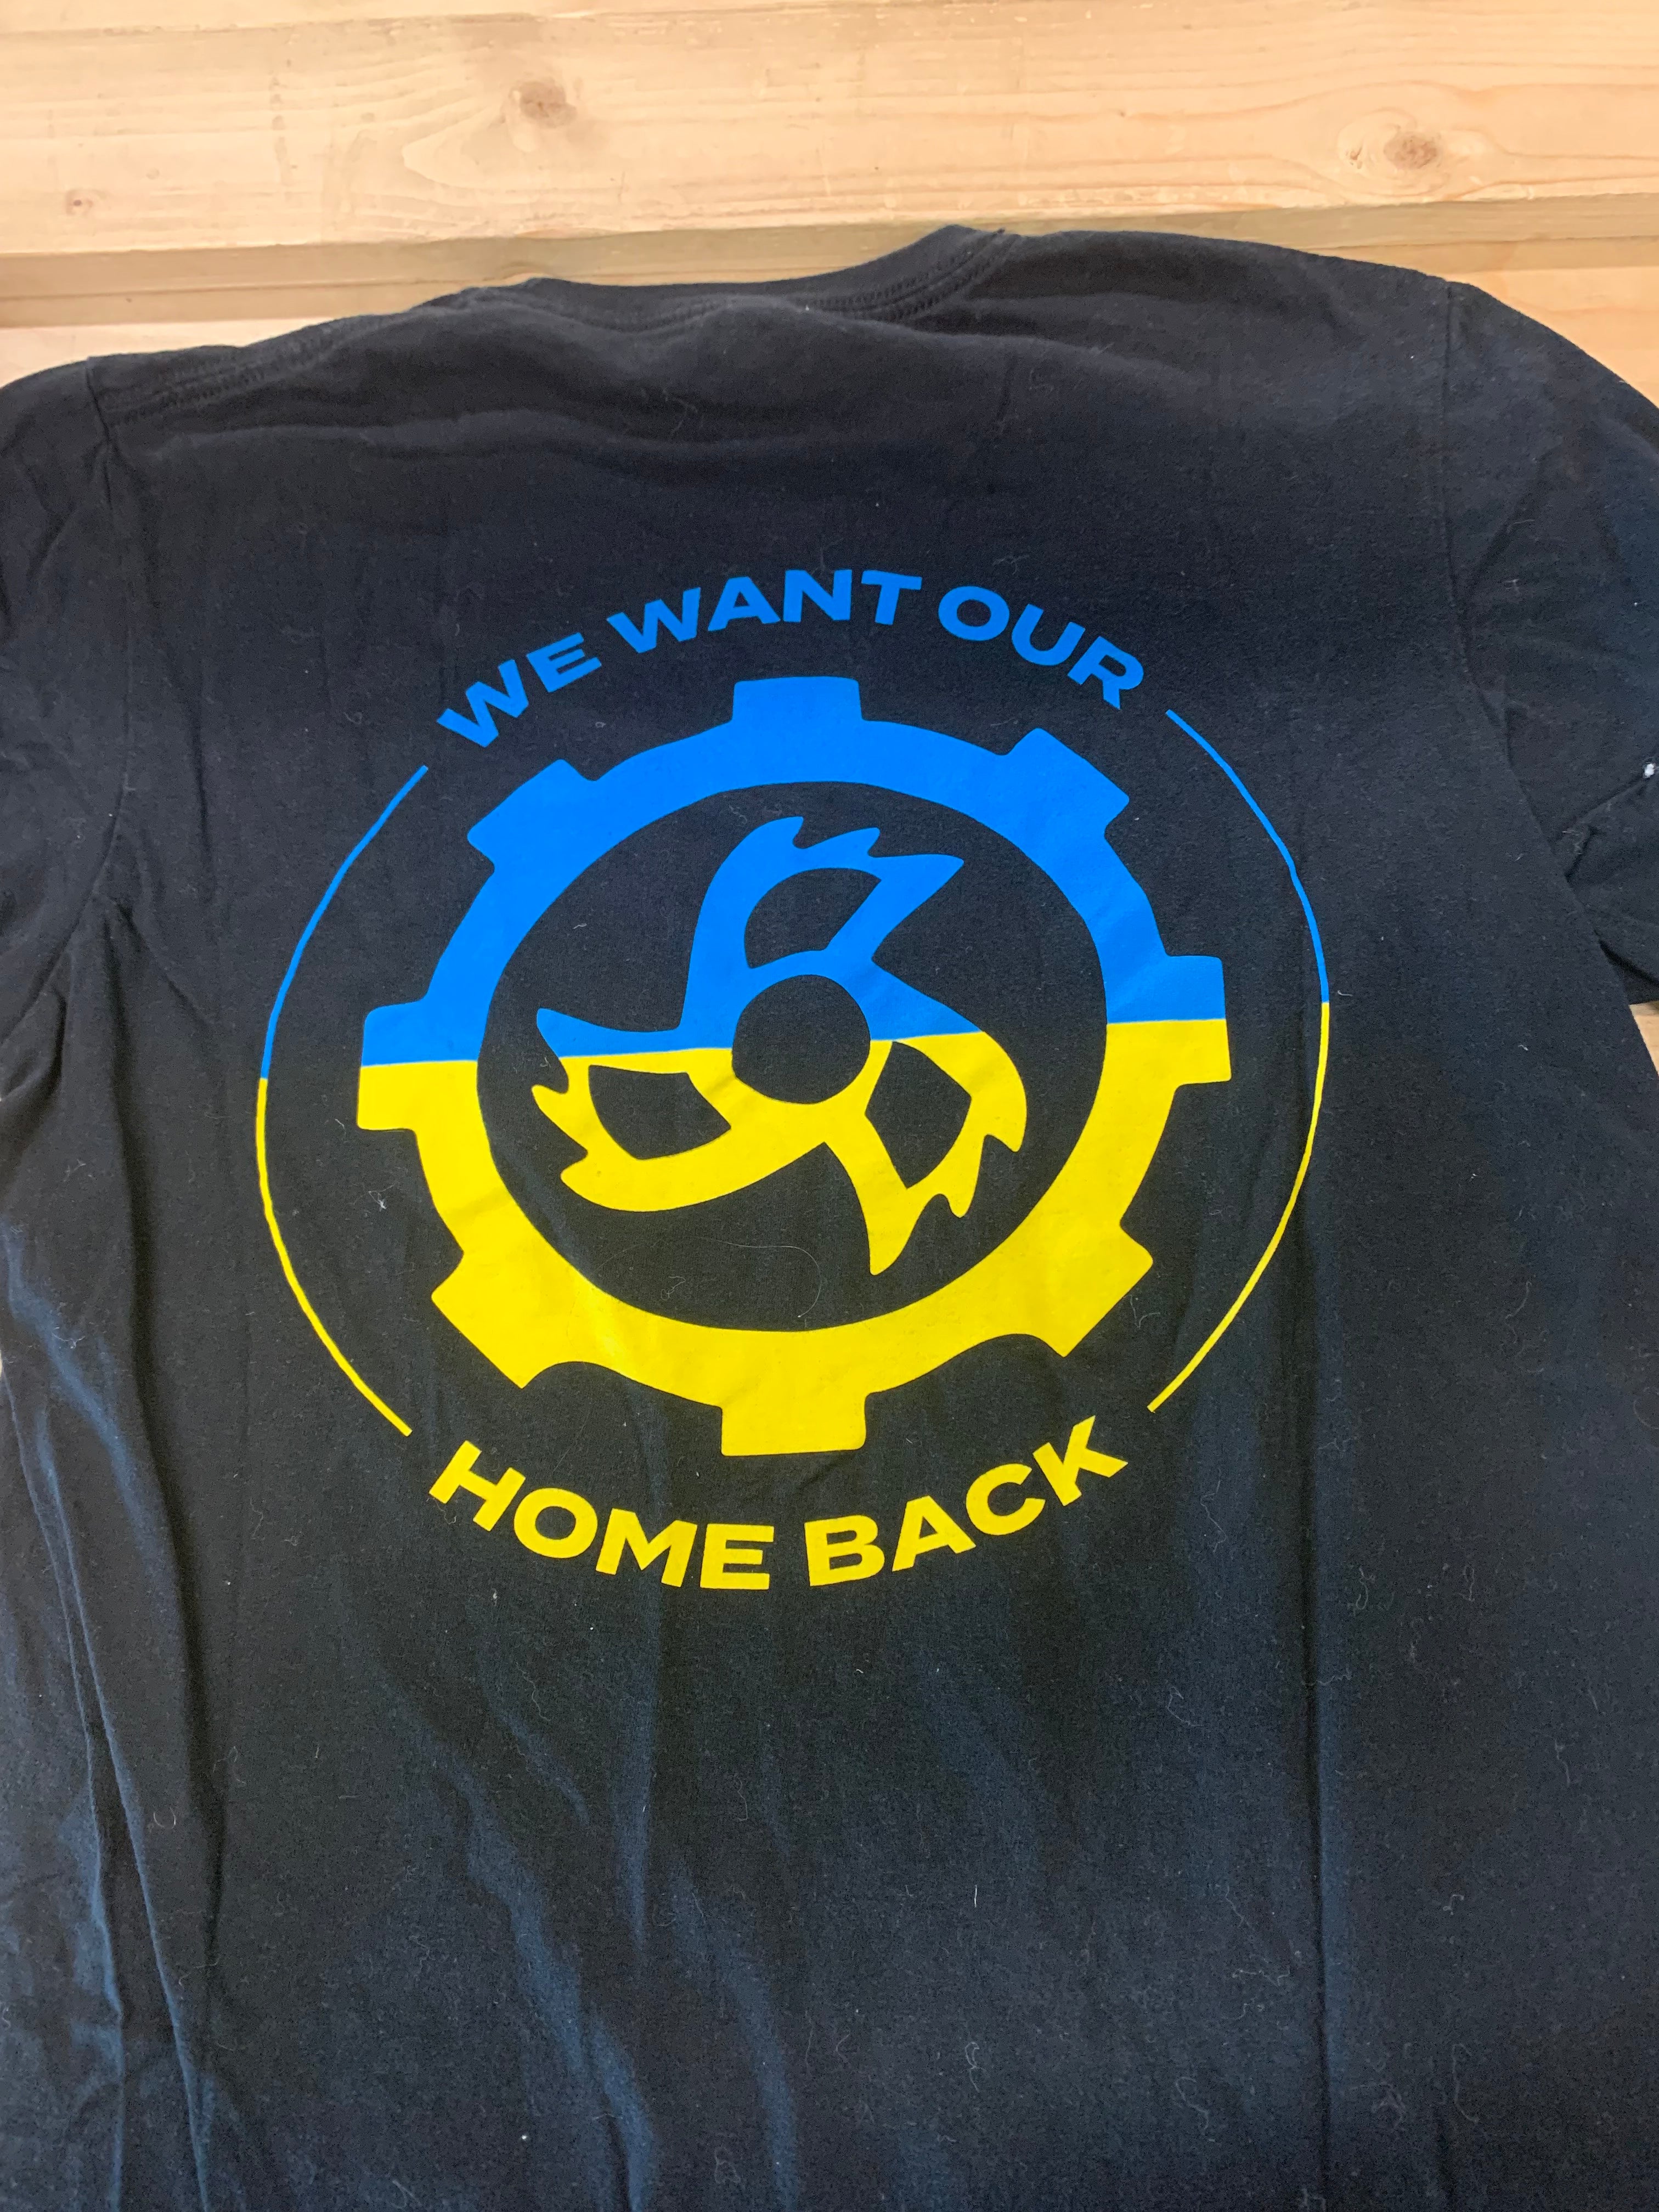 Jinjer We Want Our Home Back T-Shirt, Black, M